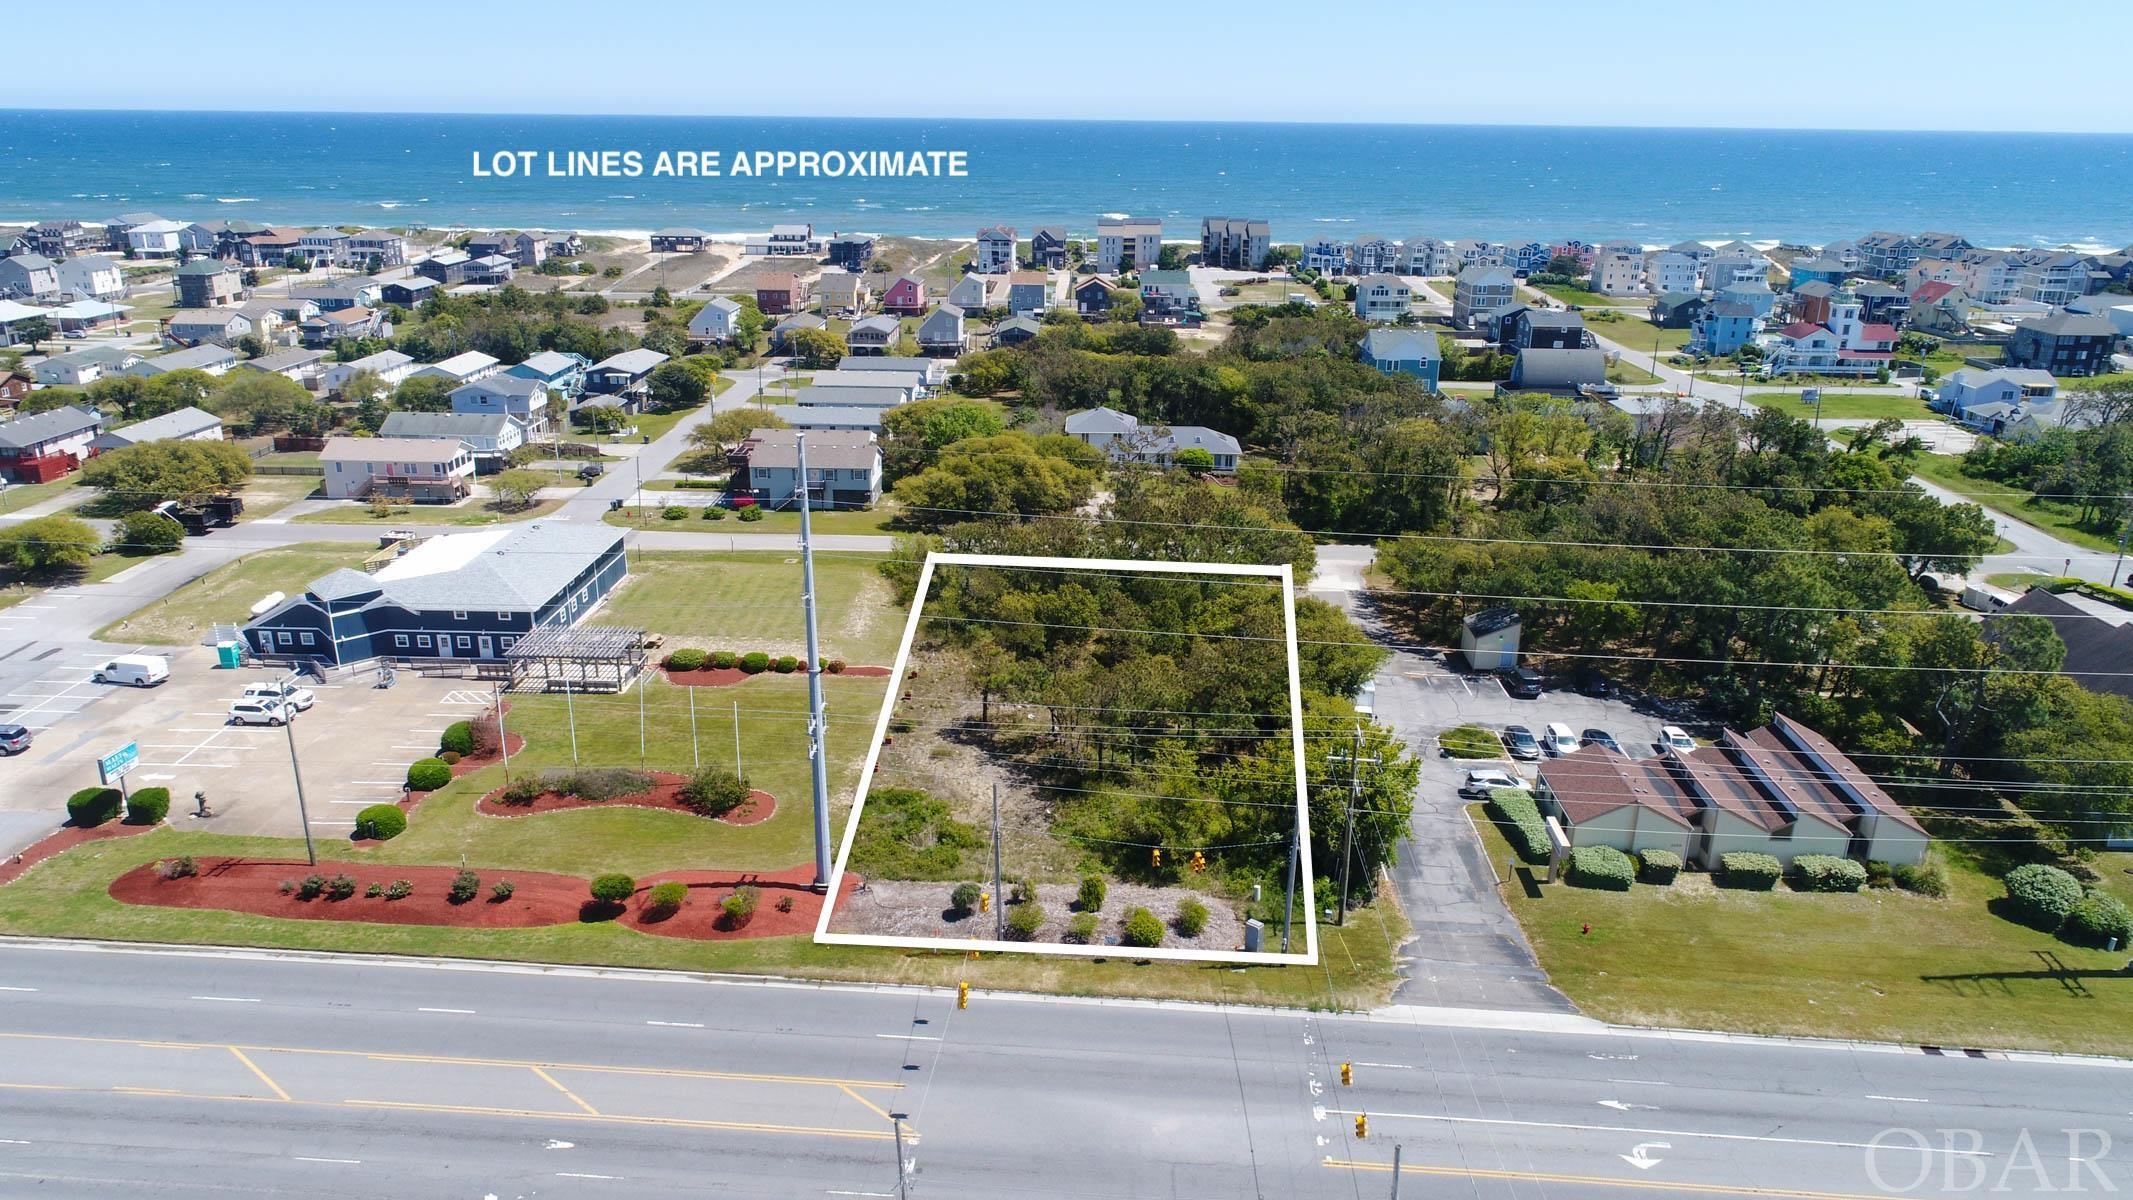 Nags Head Commercial Opportunity!  100 feet of HWY 158 Road Frontage.  Prime location in Nags Head across the street from TW's, TJ Maxx and Staples!   Excellent visibility and location.  The possibility does exist that the current stop light may be modified to have full stop light access.  Letter on file from NC DOT.  Another great feature of this property is that it also fronts Wrightsville Ave on the east side of the property potentially giving it dual access and plenty of options for the new owner.  This is a fantastic opportunity to own commercial property at an affordable price in the heart of Nags Head!